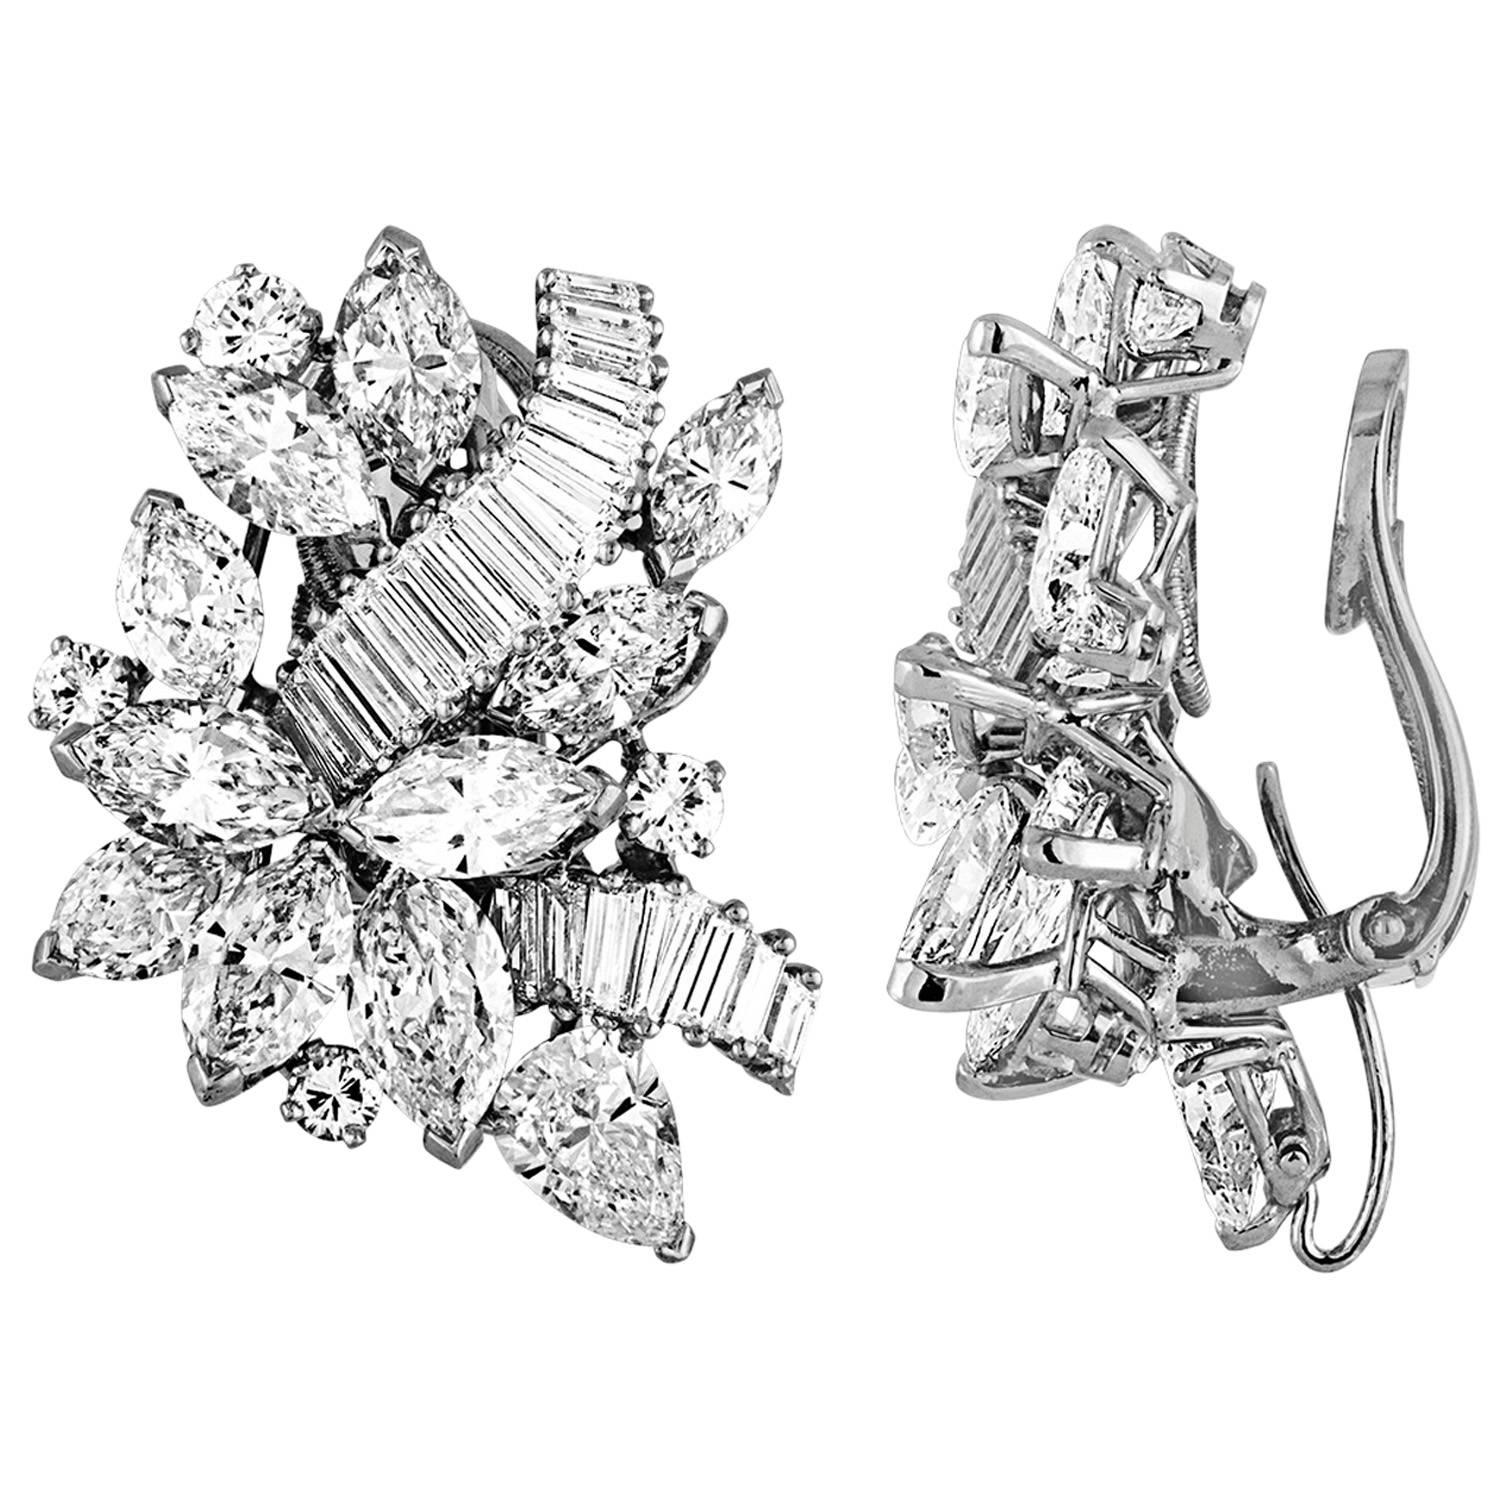 Elegant pair of Earring made from Platinum and has different shapes of Diamonds creating The Royal look. The pair is combination of Round Brilliants, Marquises, Pear Shapes and Baguettes - and all are White Diamonds. The diamonds are estimated to be